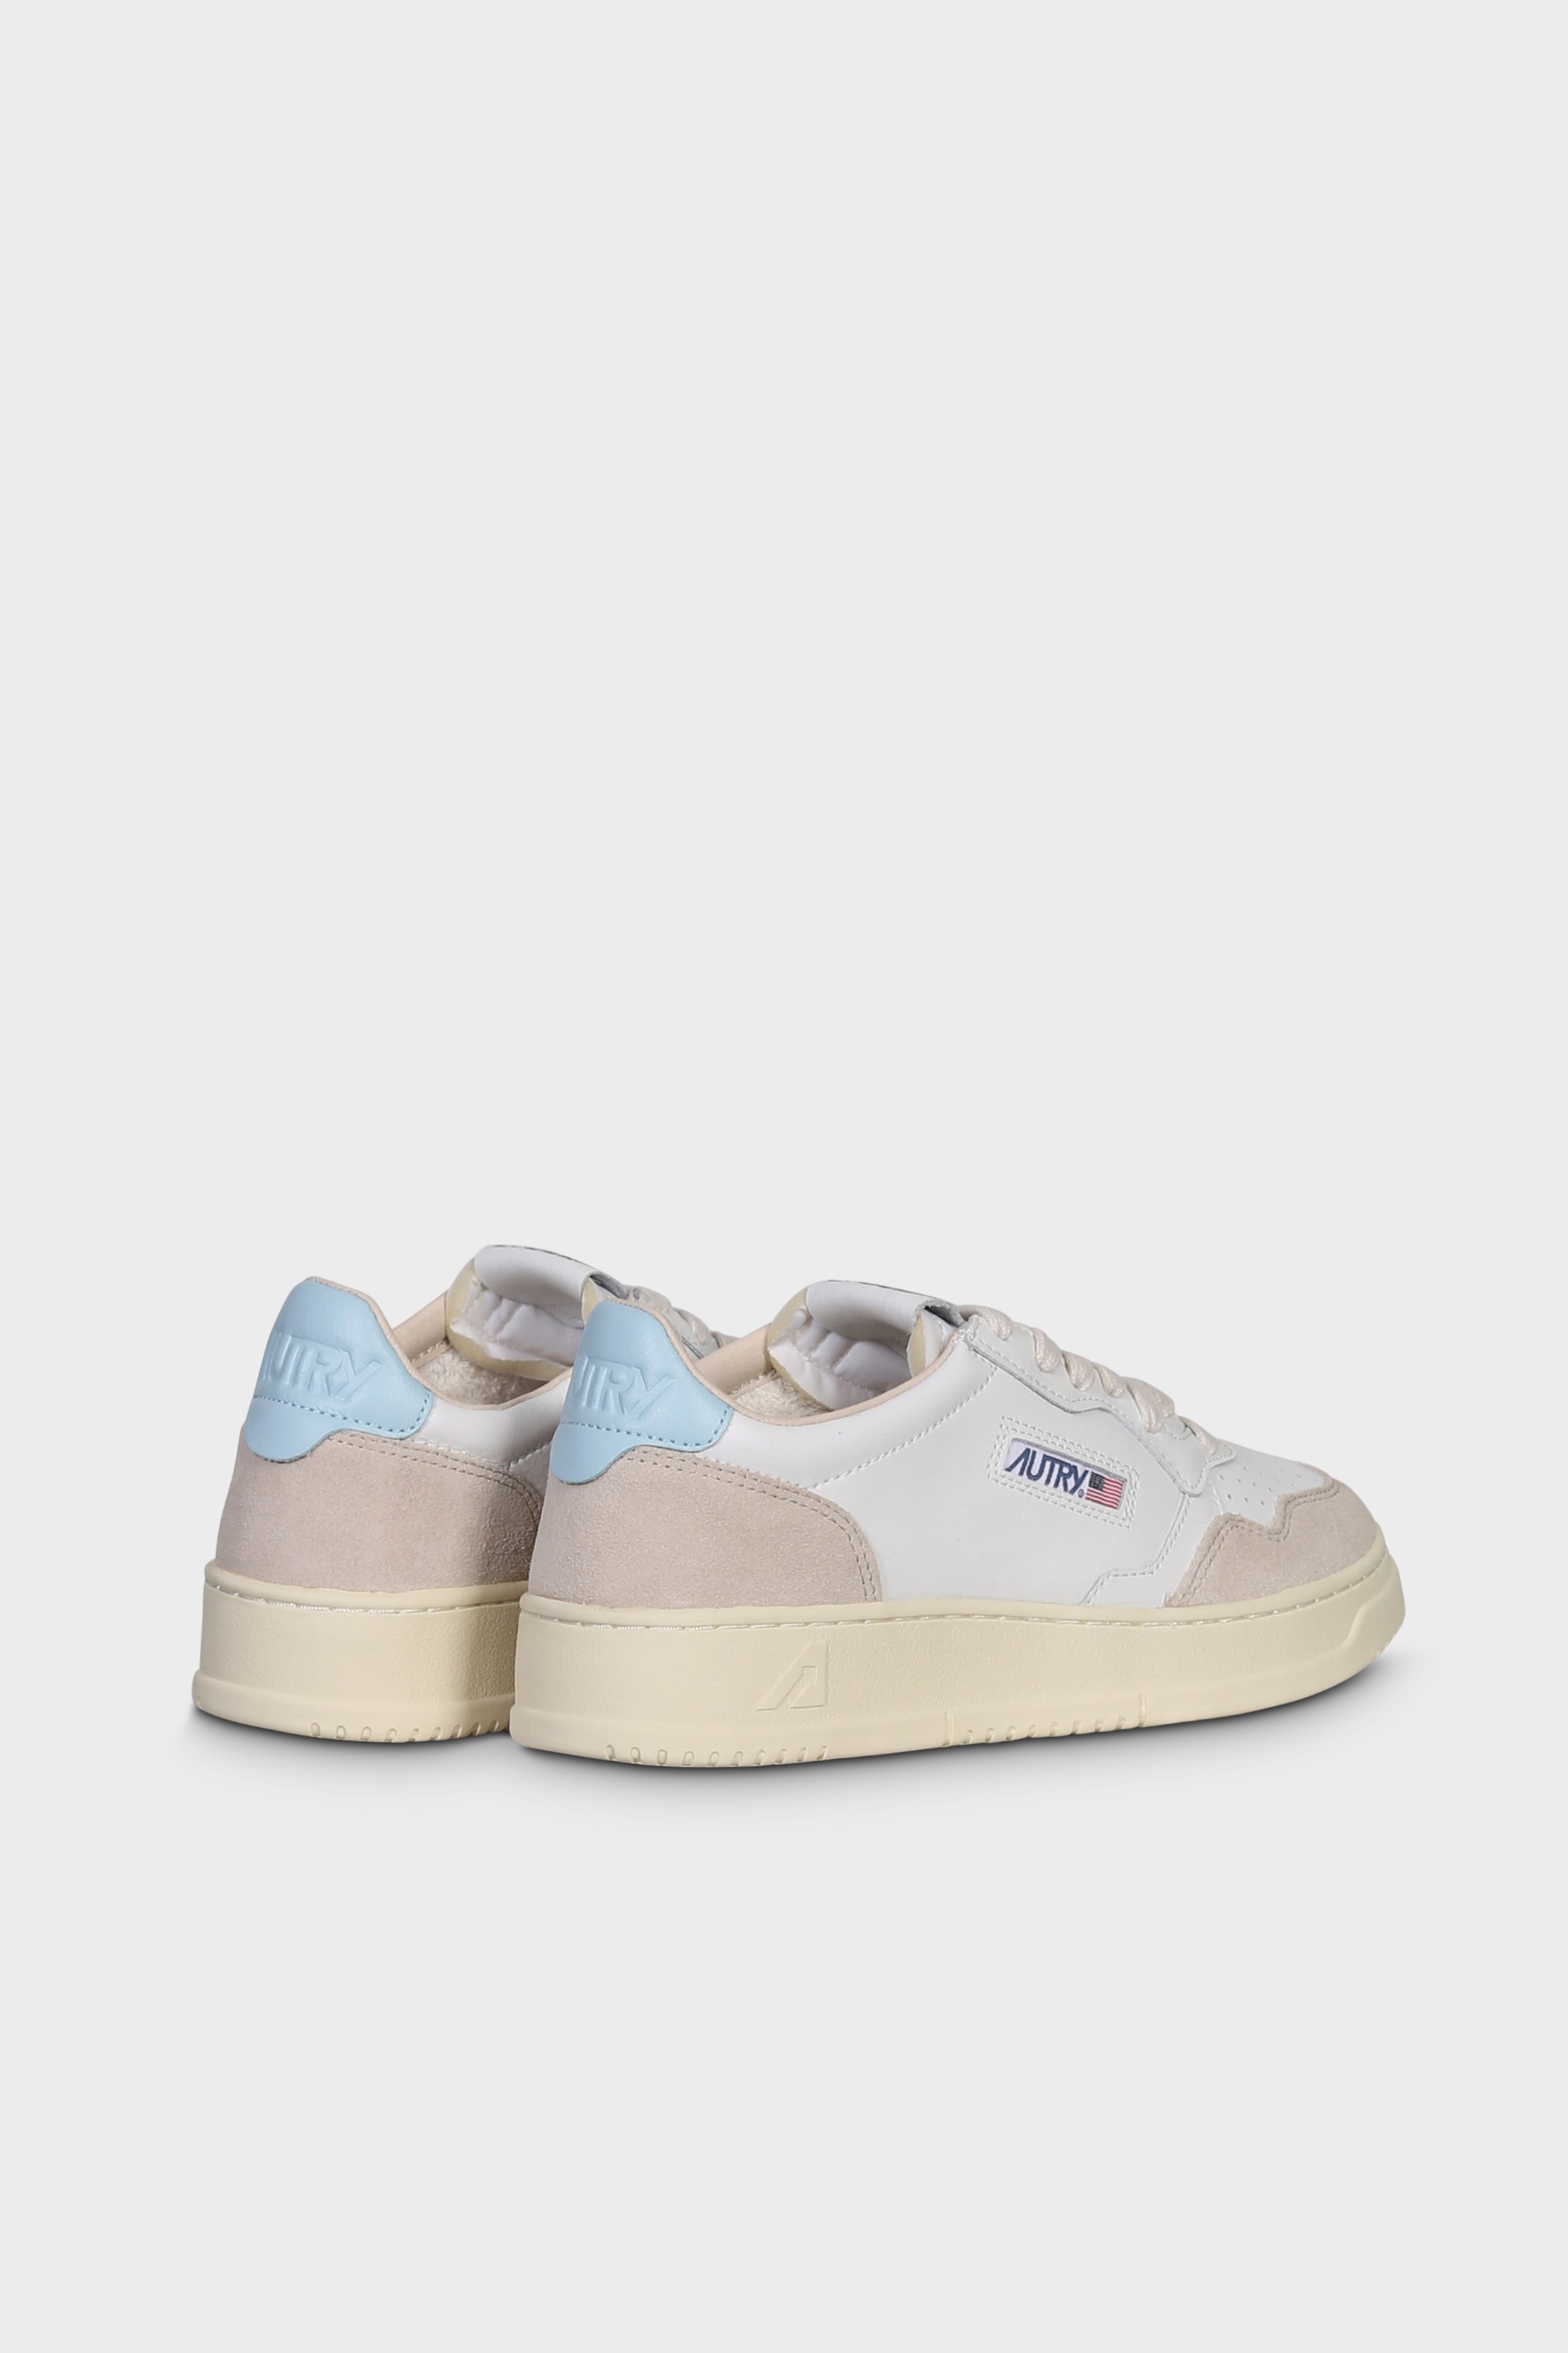 AUTRY ACTION SHOES Medalist Low Sneaker Suede White/Stream Blue 40